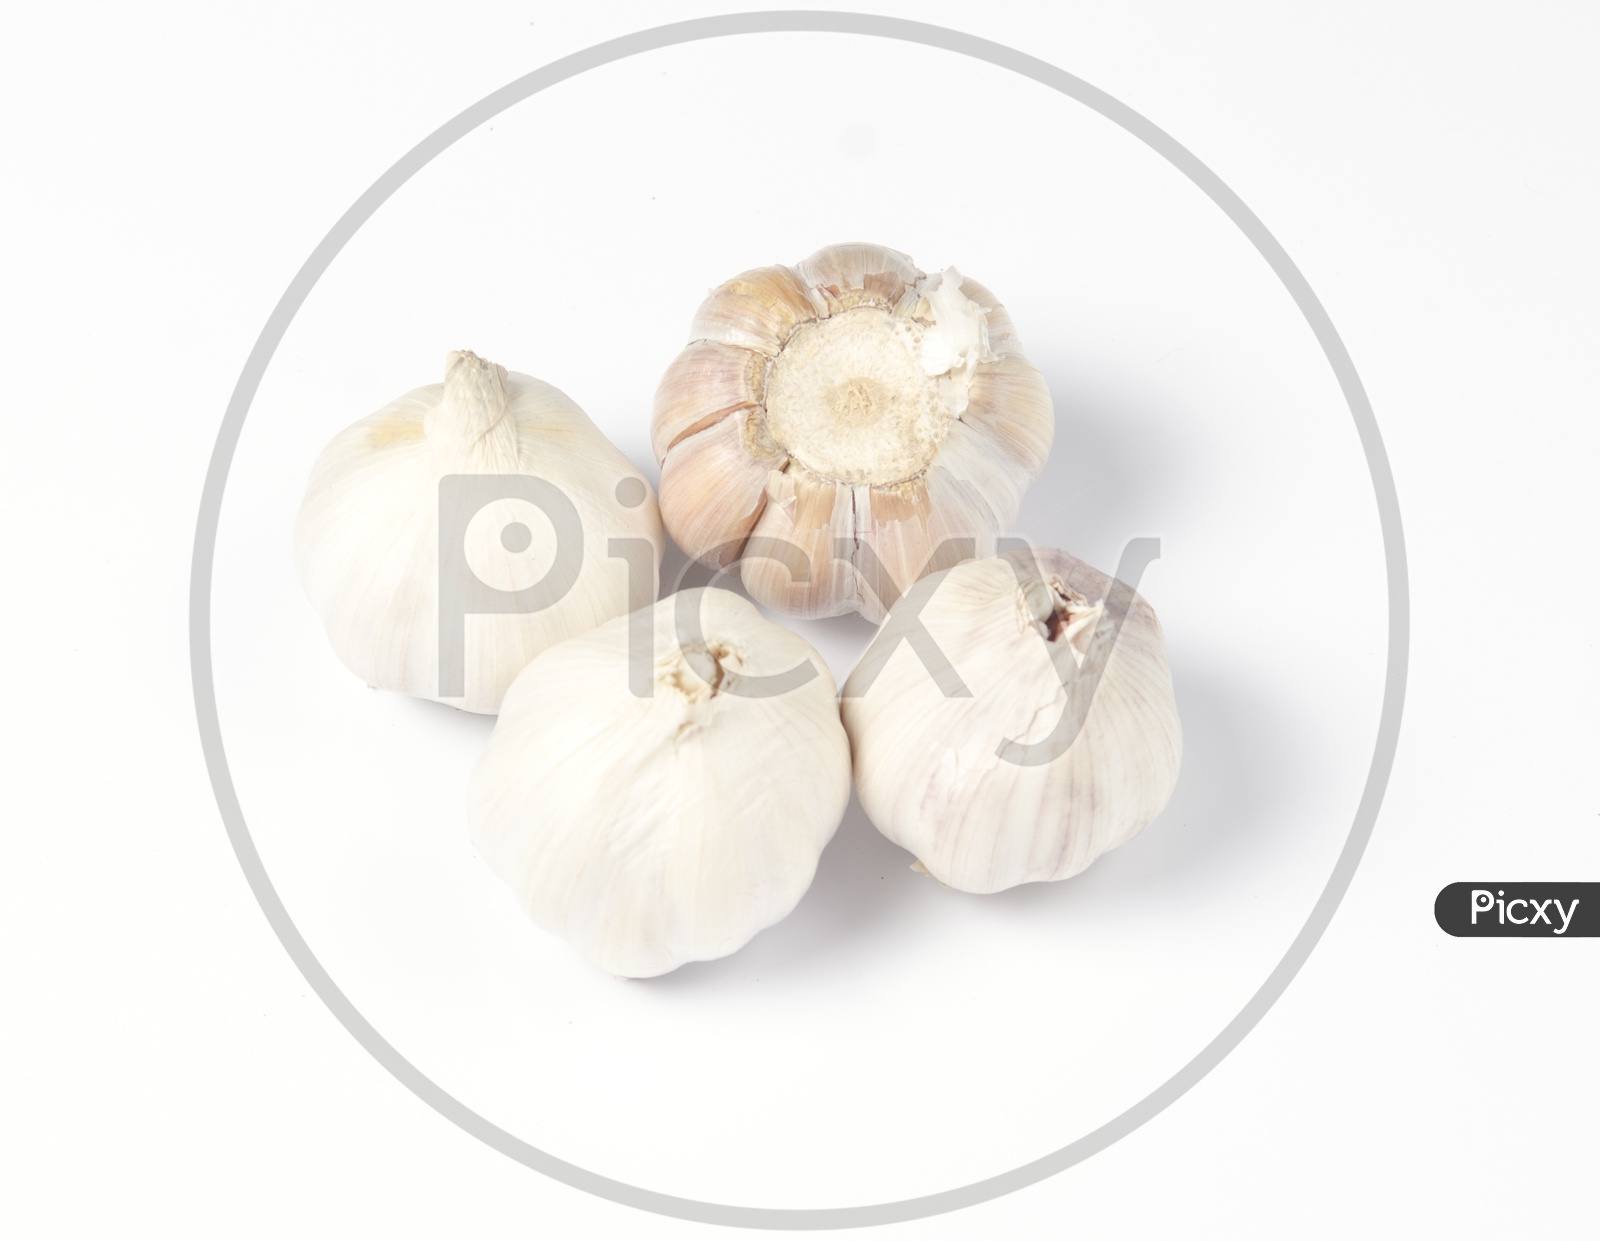 Garlic head detail isolated on white background